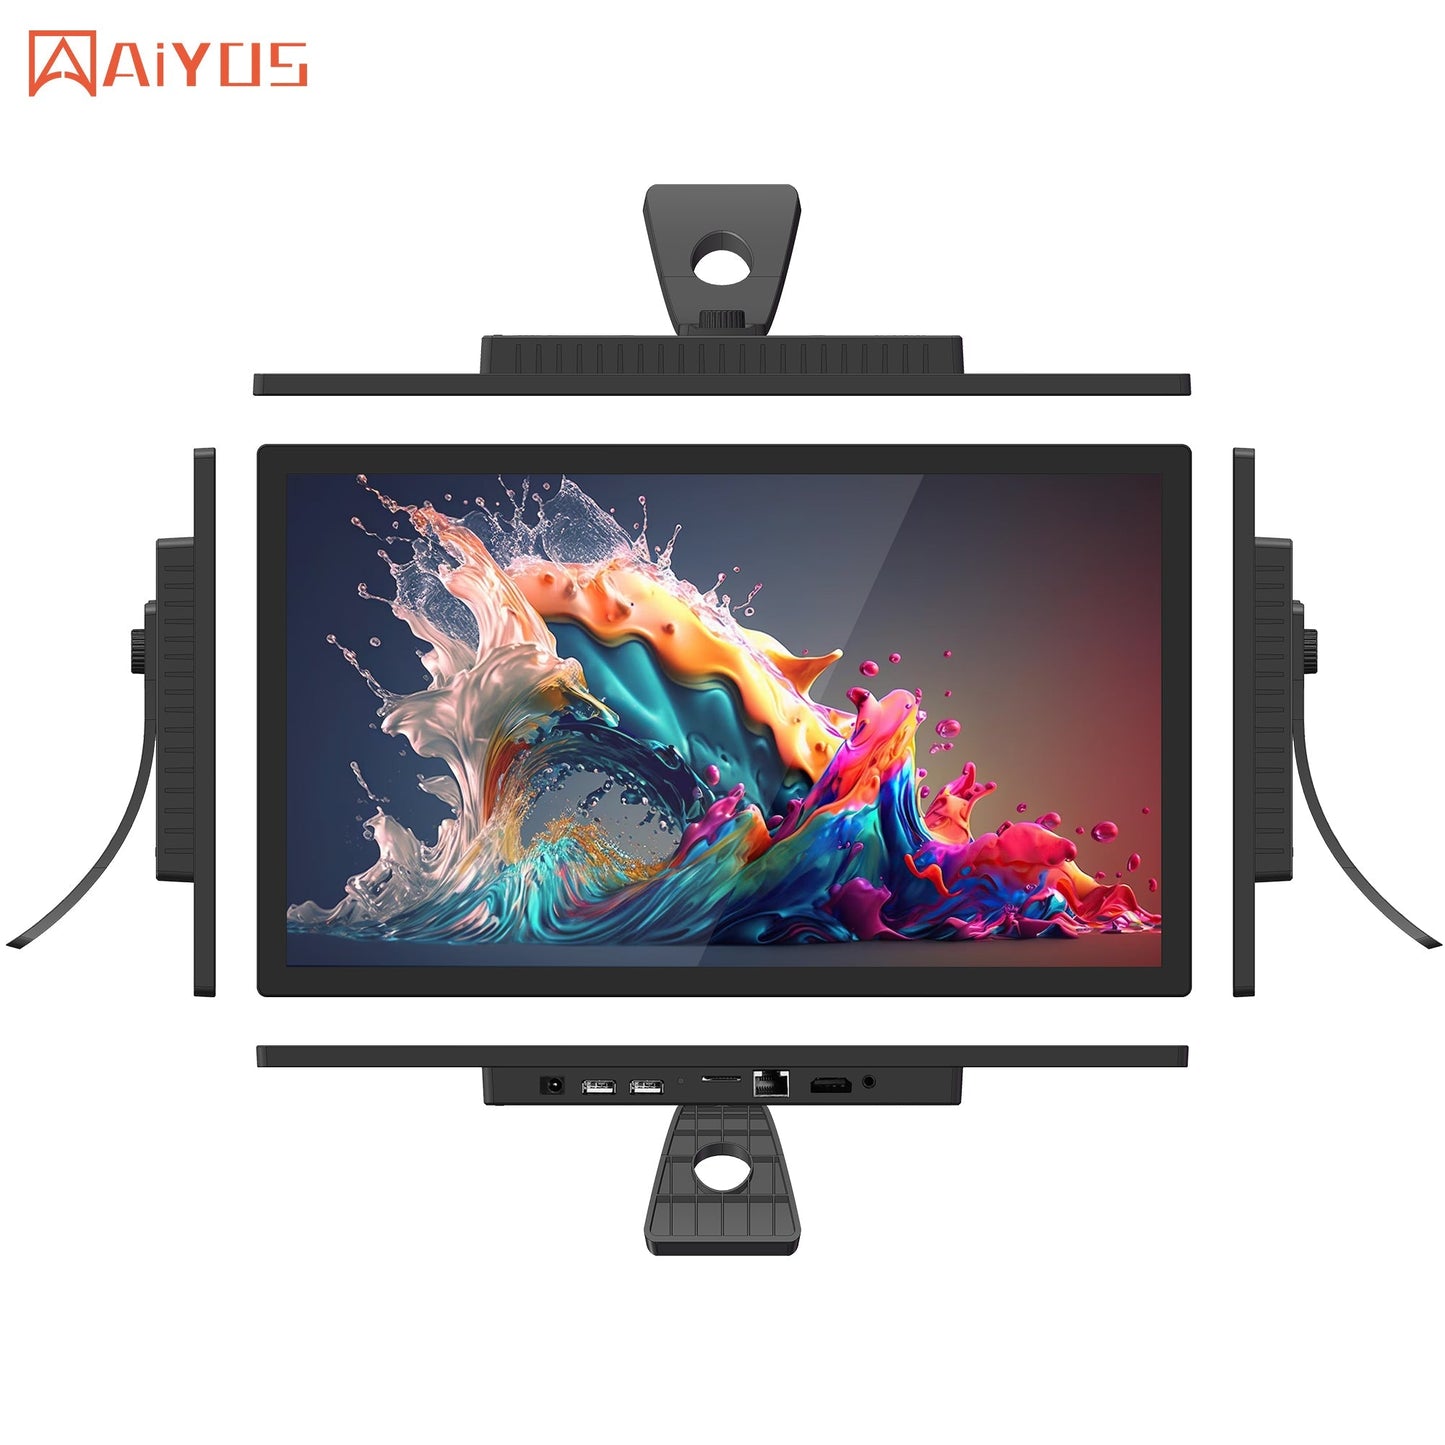 15.6 Inch Ultra Thin and Light Weight Fashion Style  IPS FHD Screen All in One Android Tablet PC for Meeting Class Room